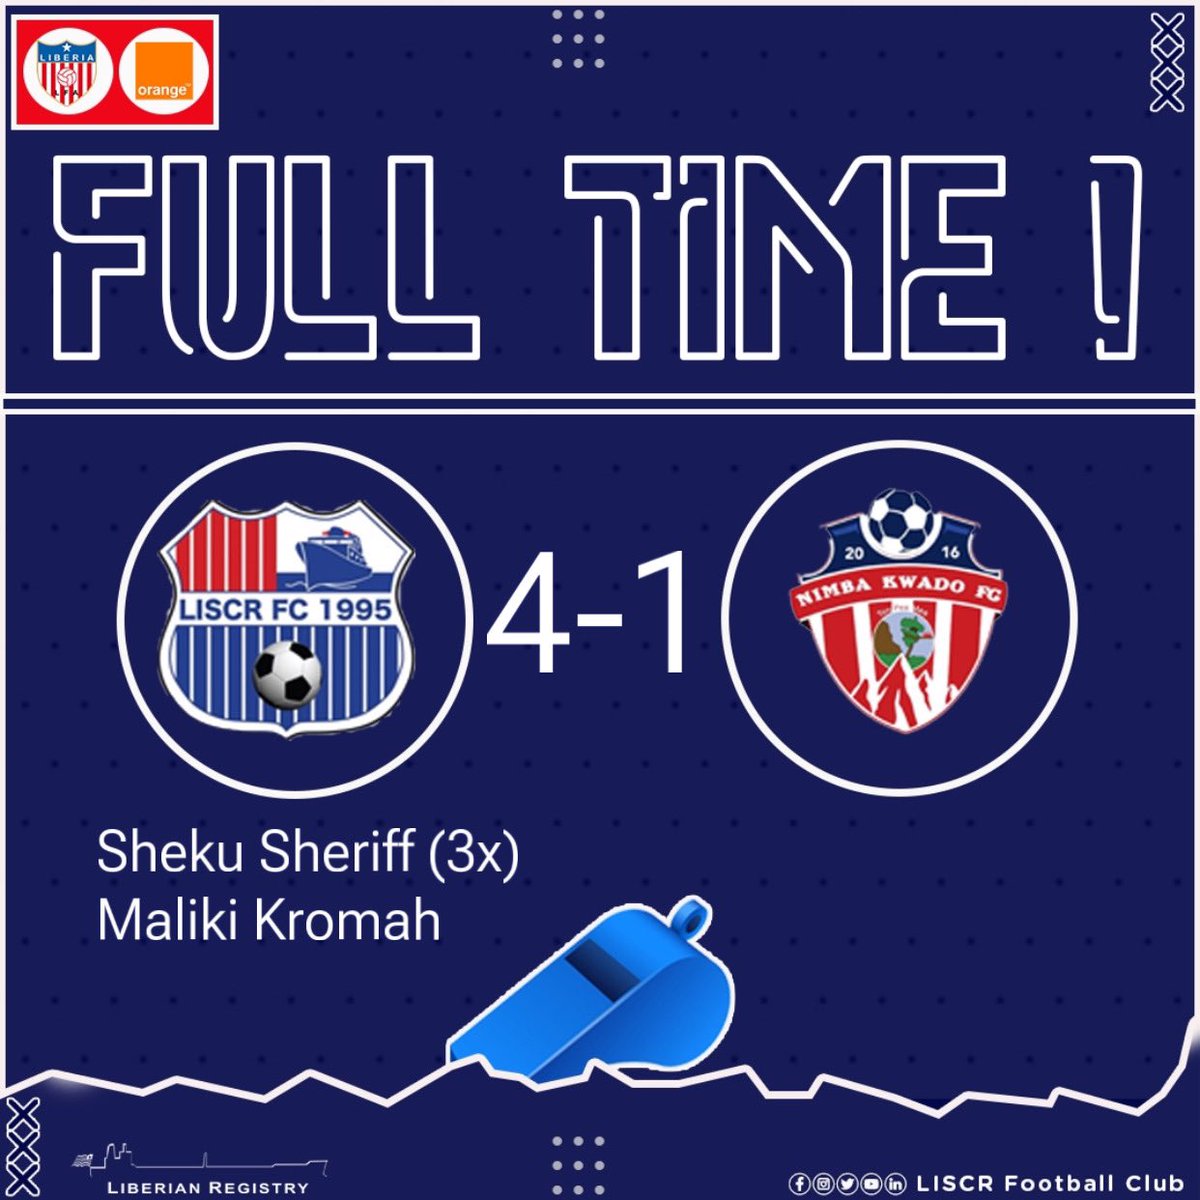 The three points are secured at home against Nimba Kwado. Sheku Sheriff’s hat trick and a goal from Maliki Kromah secured the win! #ThisIsLiscrFC!